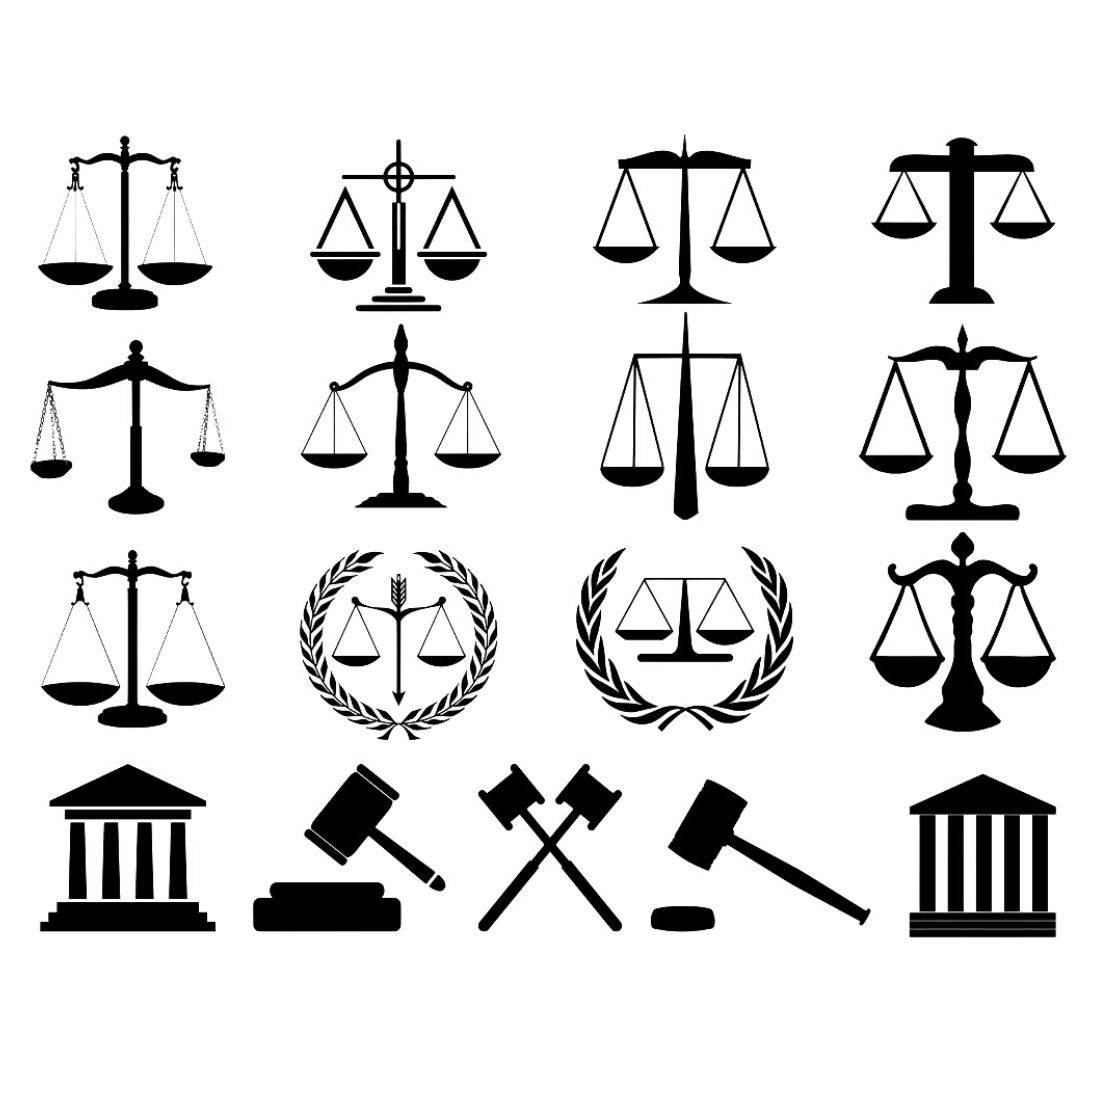 Balance and fairness: Justice scale icon